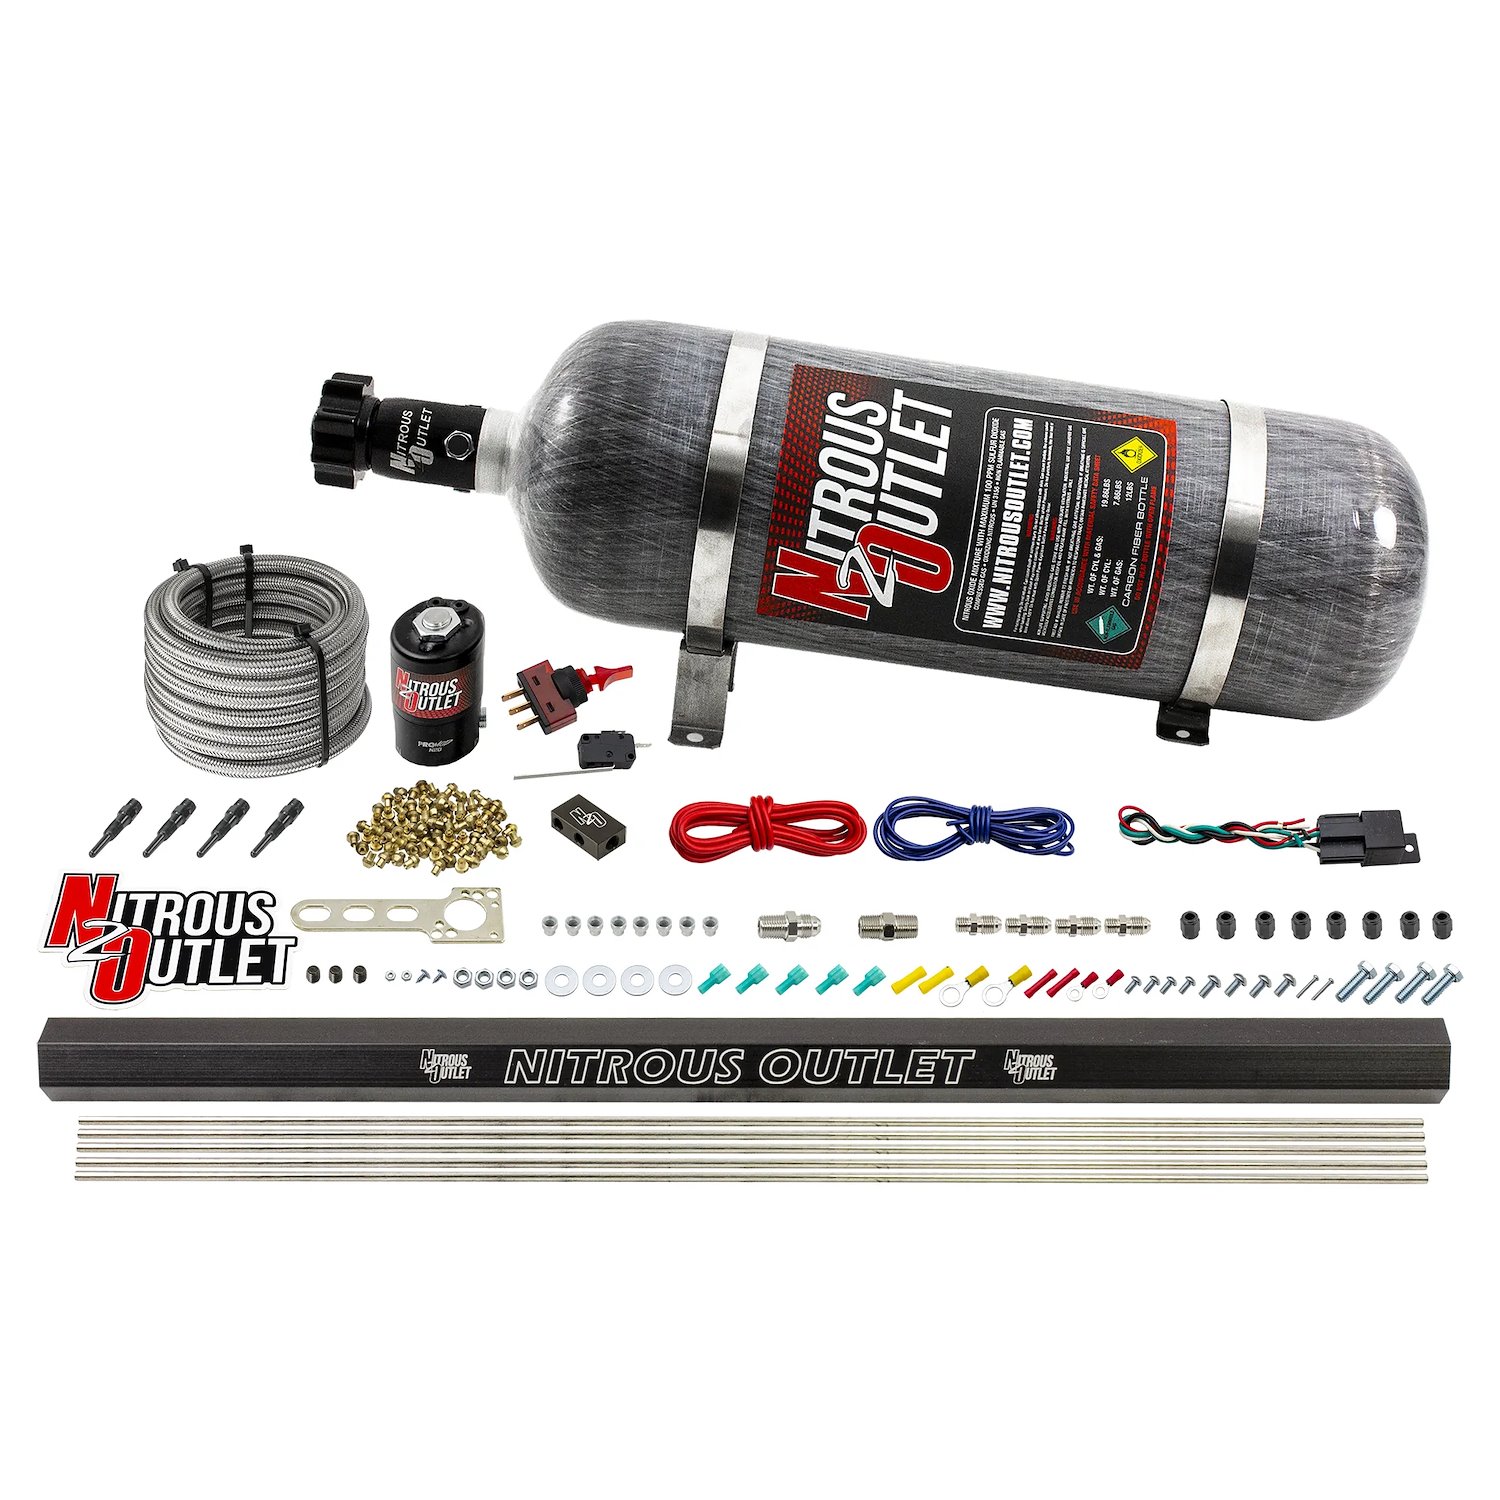 00-10361-12 Dry 4-Cyl Direct Port System, .122 Nitrous Solenoid/Injection Rail/90-Degree Discharge Nozzles, 50-250HP, 12lb